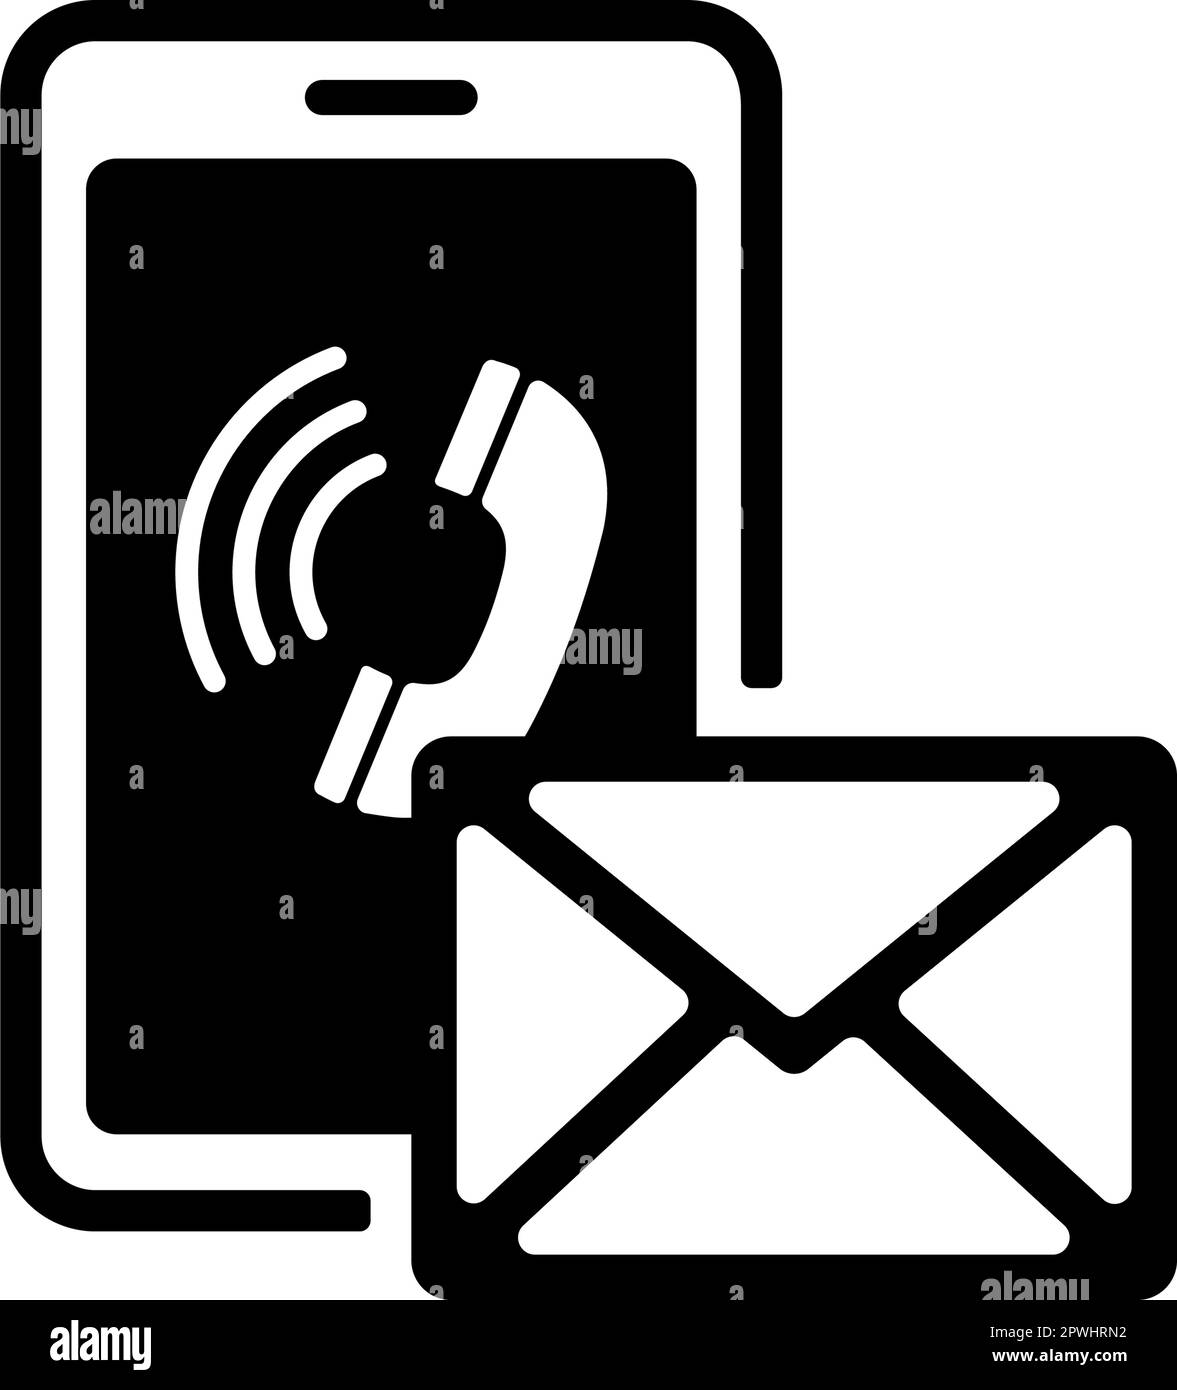 Contact us ( email and telephone ) vector icon illustration Stock Vector